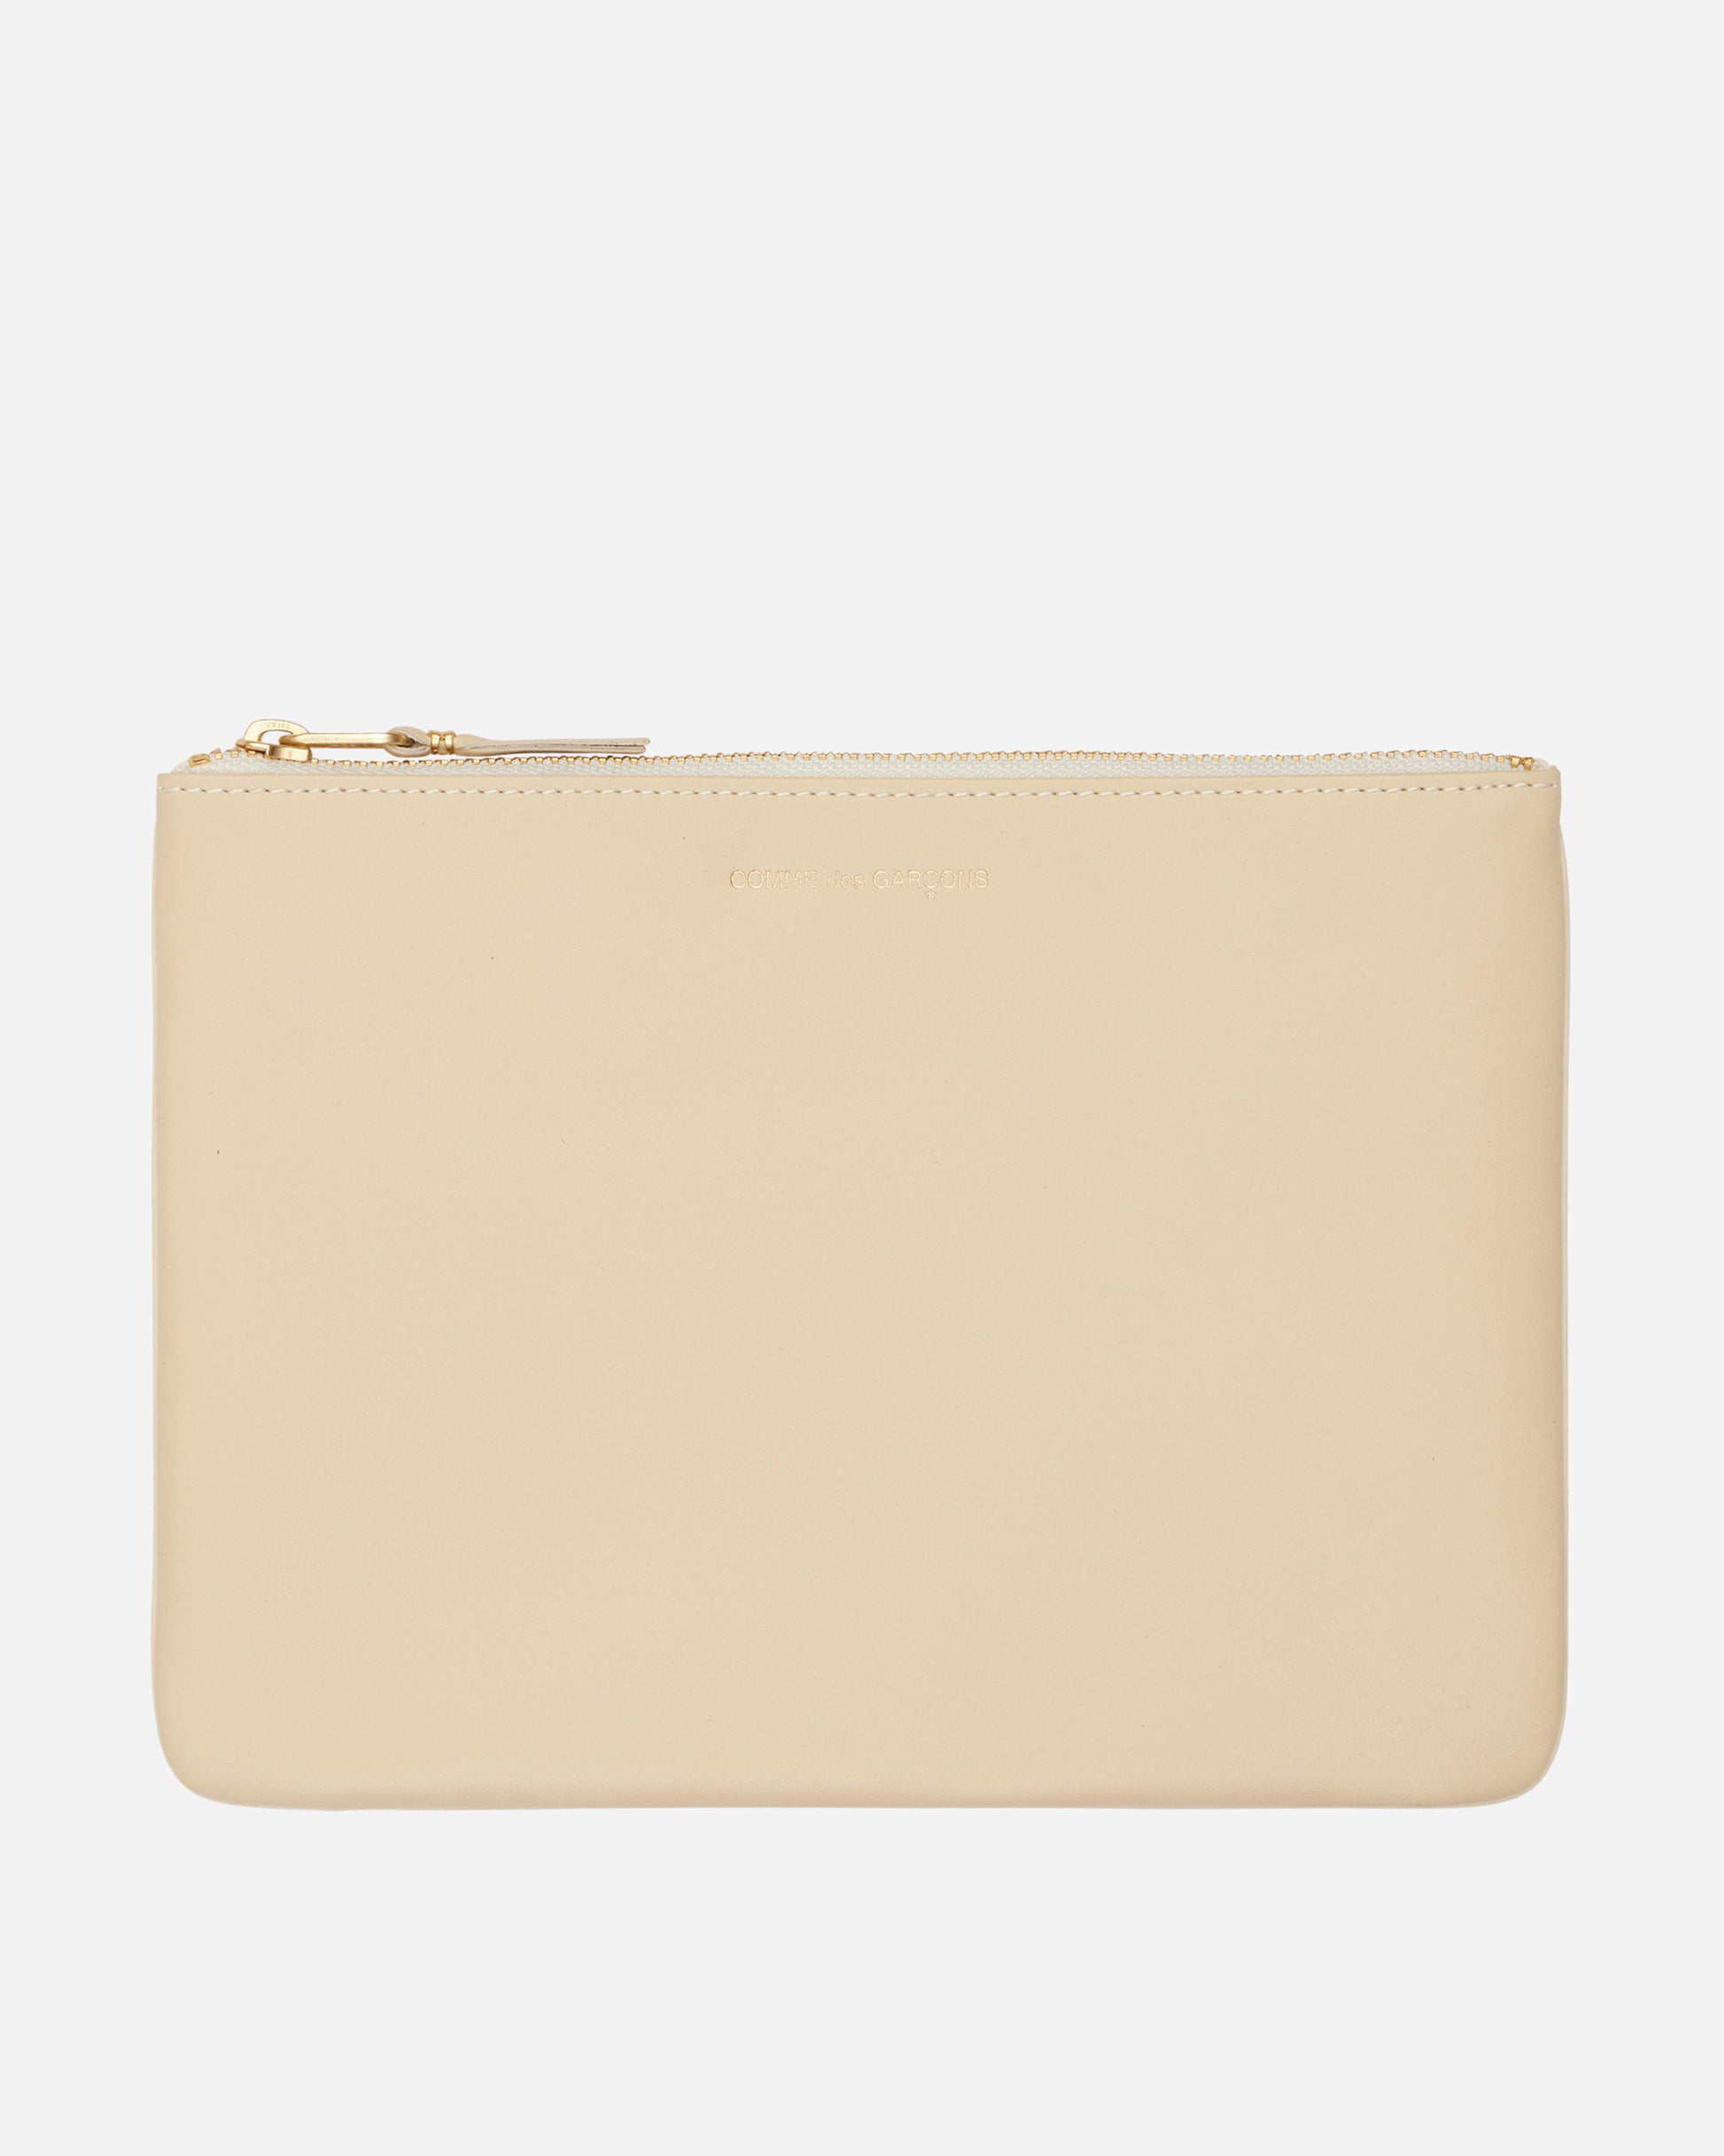 Comme Des Garçons Wallet Classic Leather Line Walllet Off White Wallets and Cardholders Wallets SA5100 3